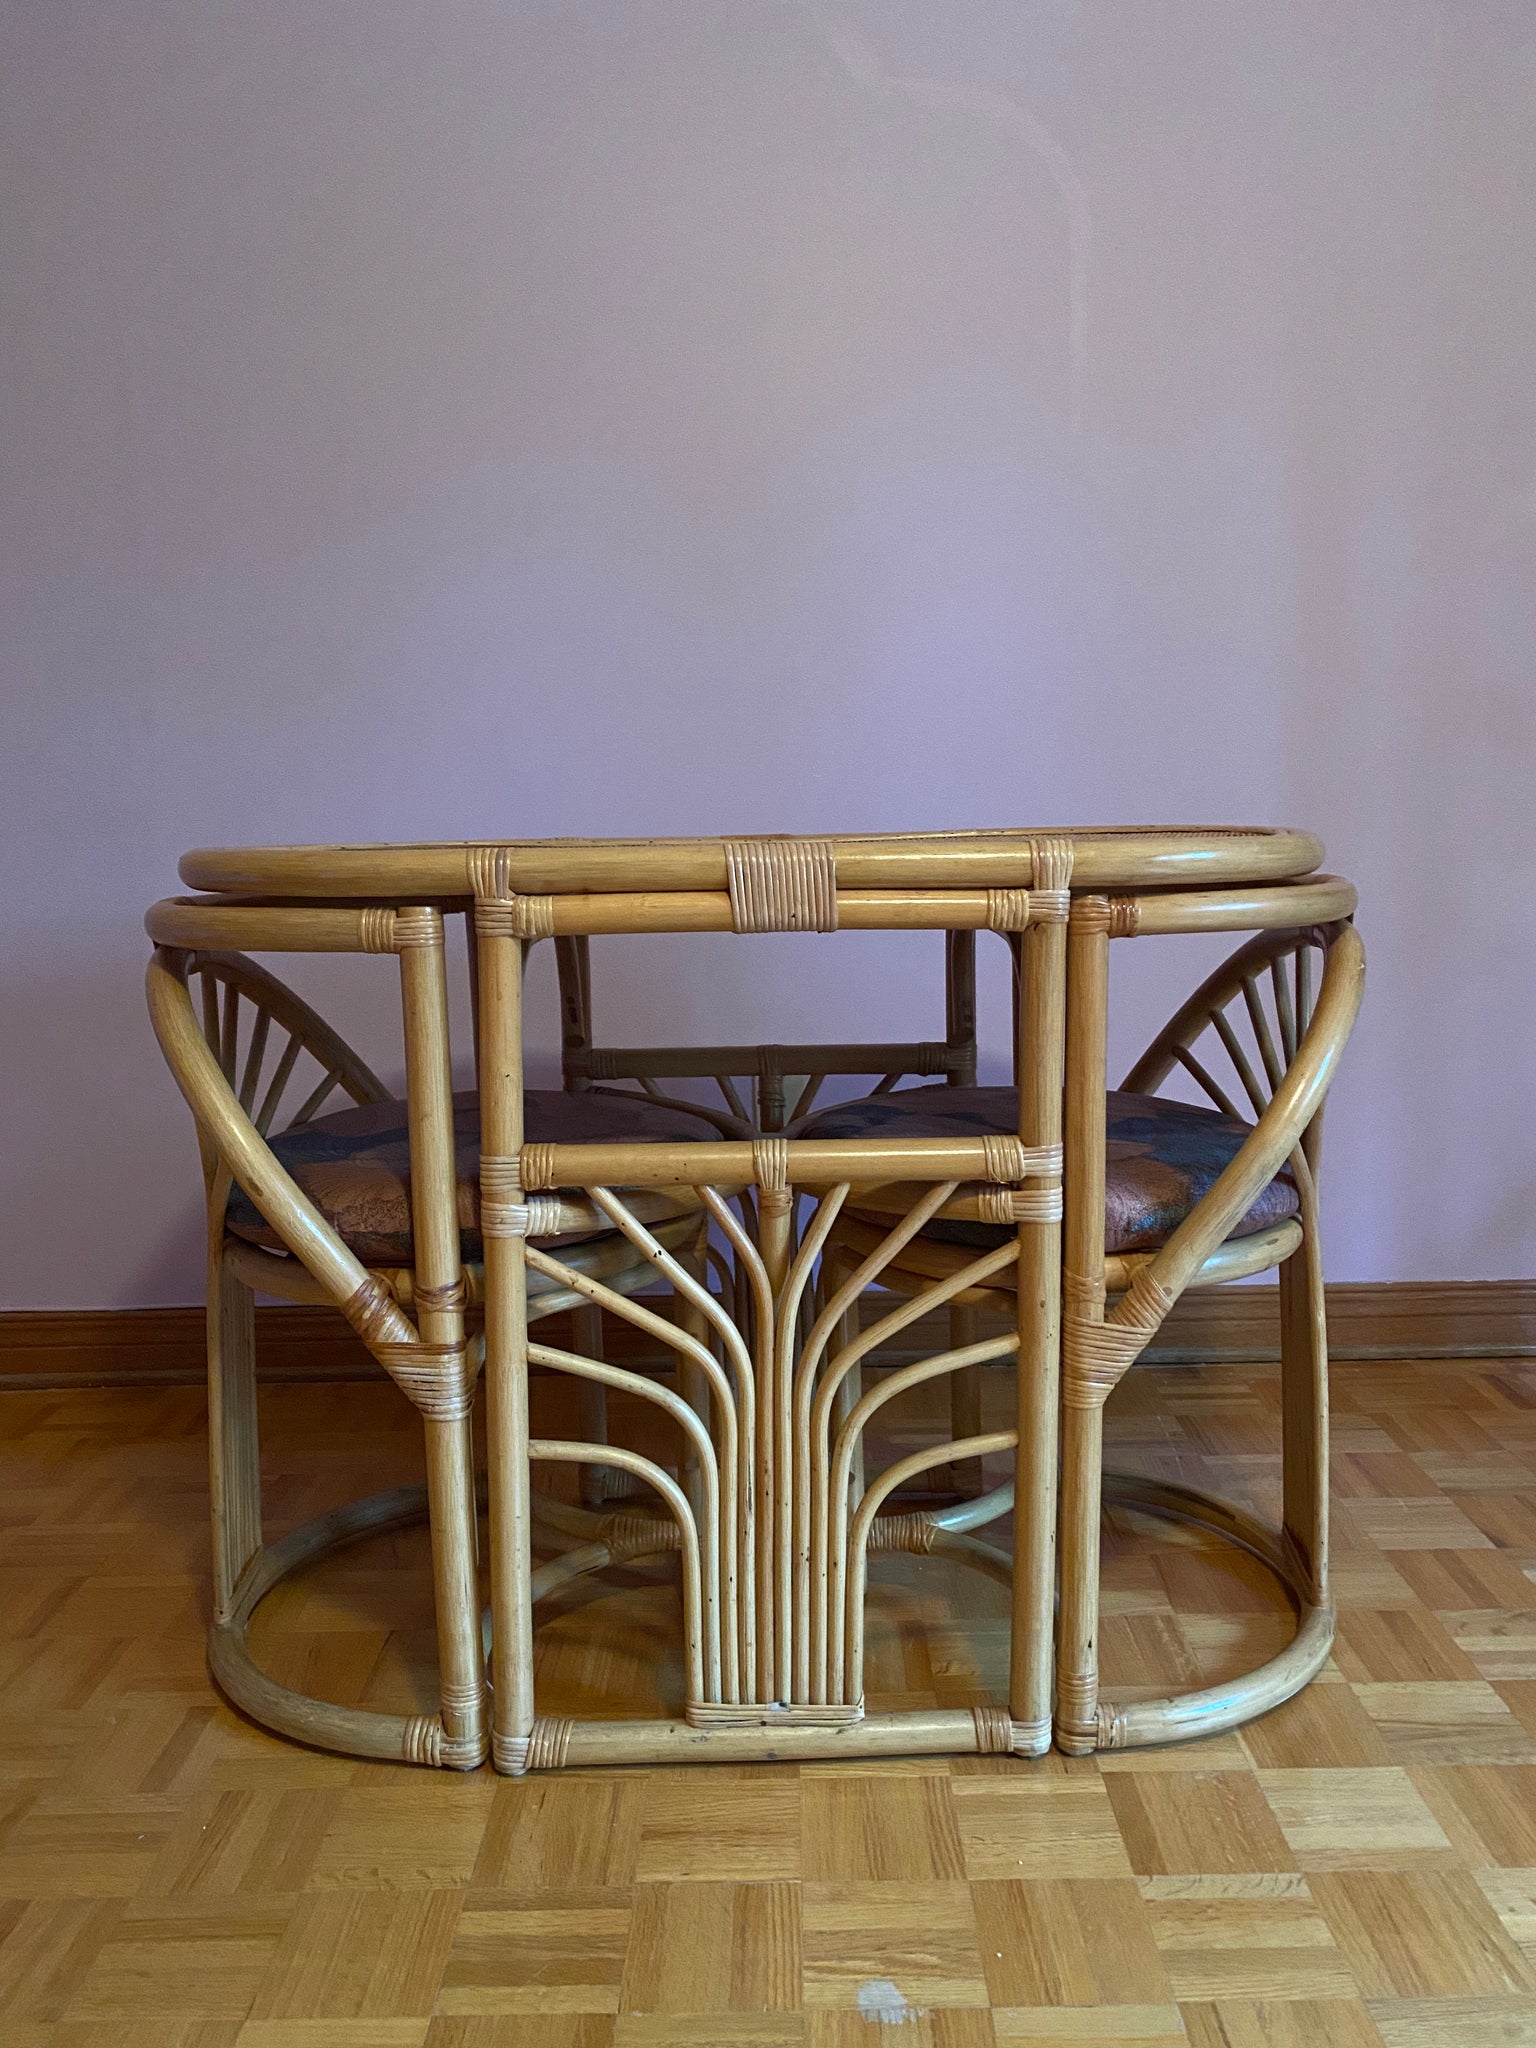 Small bamboo table & chairs dining set